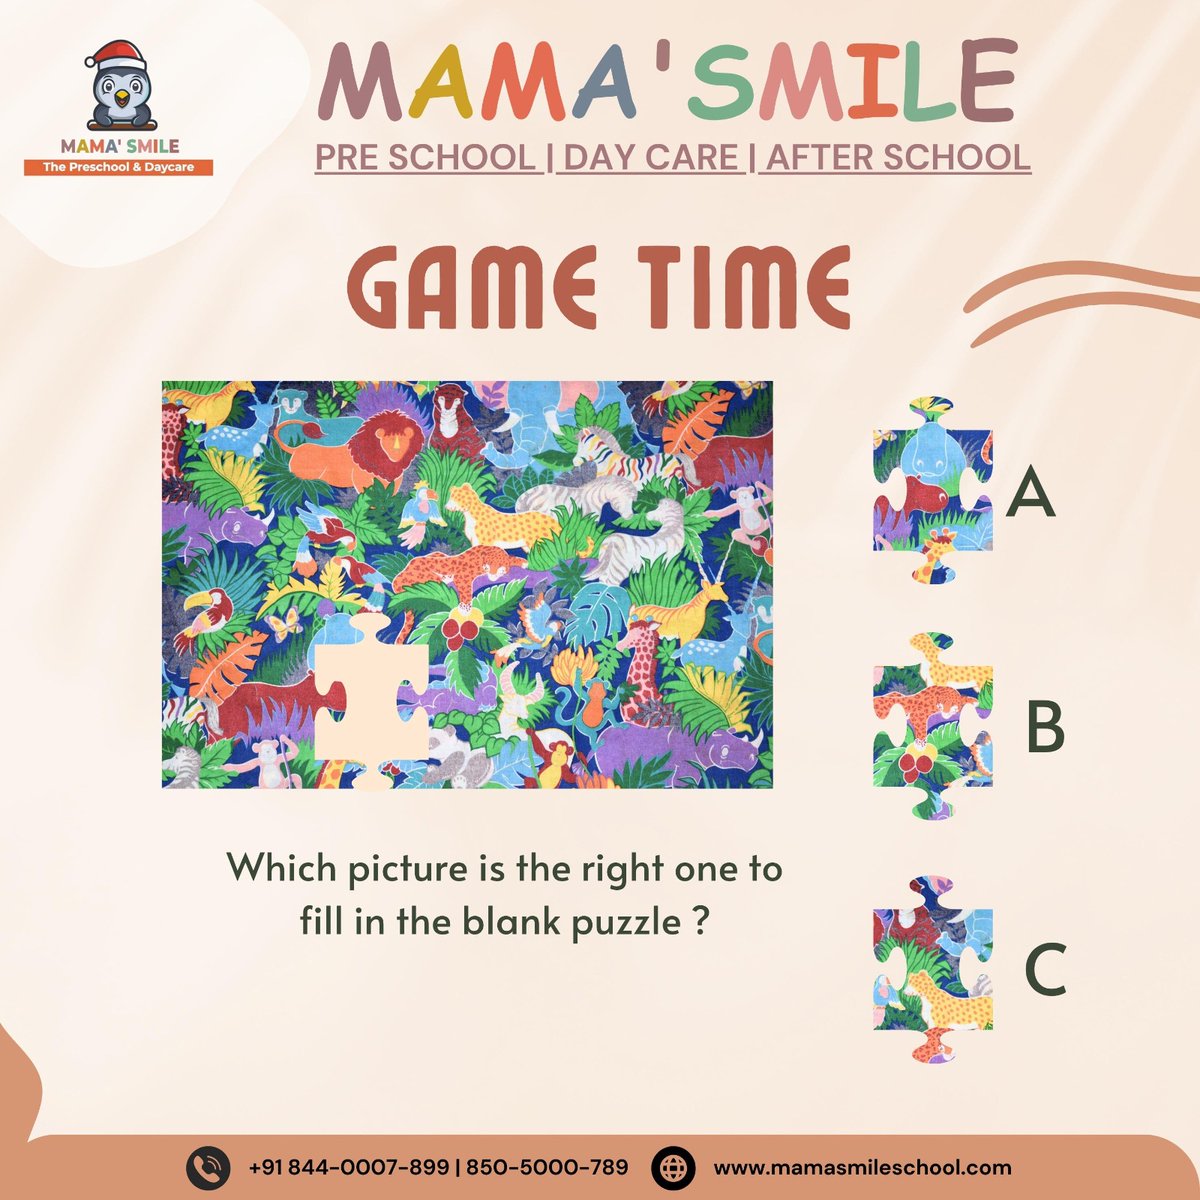 It's a game time for kids...

Tell me which picture is the right one to fill in the blank puzzle?

#QuizTime #BrainTeasers #KidsQuiz #EducationalGames #FunLearning #QuizForKids #BrainyKids #PlayAndLearn #QuizFun #MindGames #QuizDay #LearningIsFun #KidsGames #BrainyGames